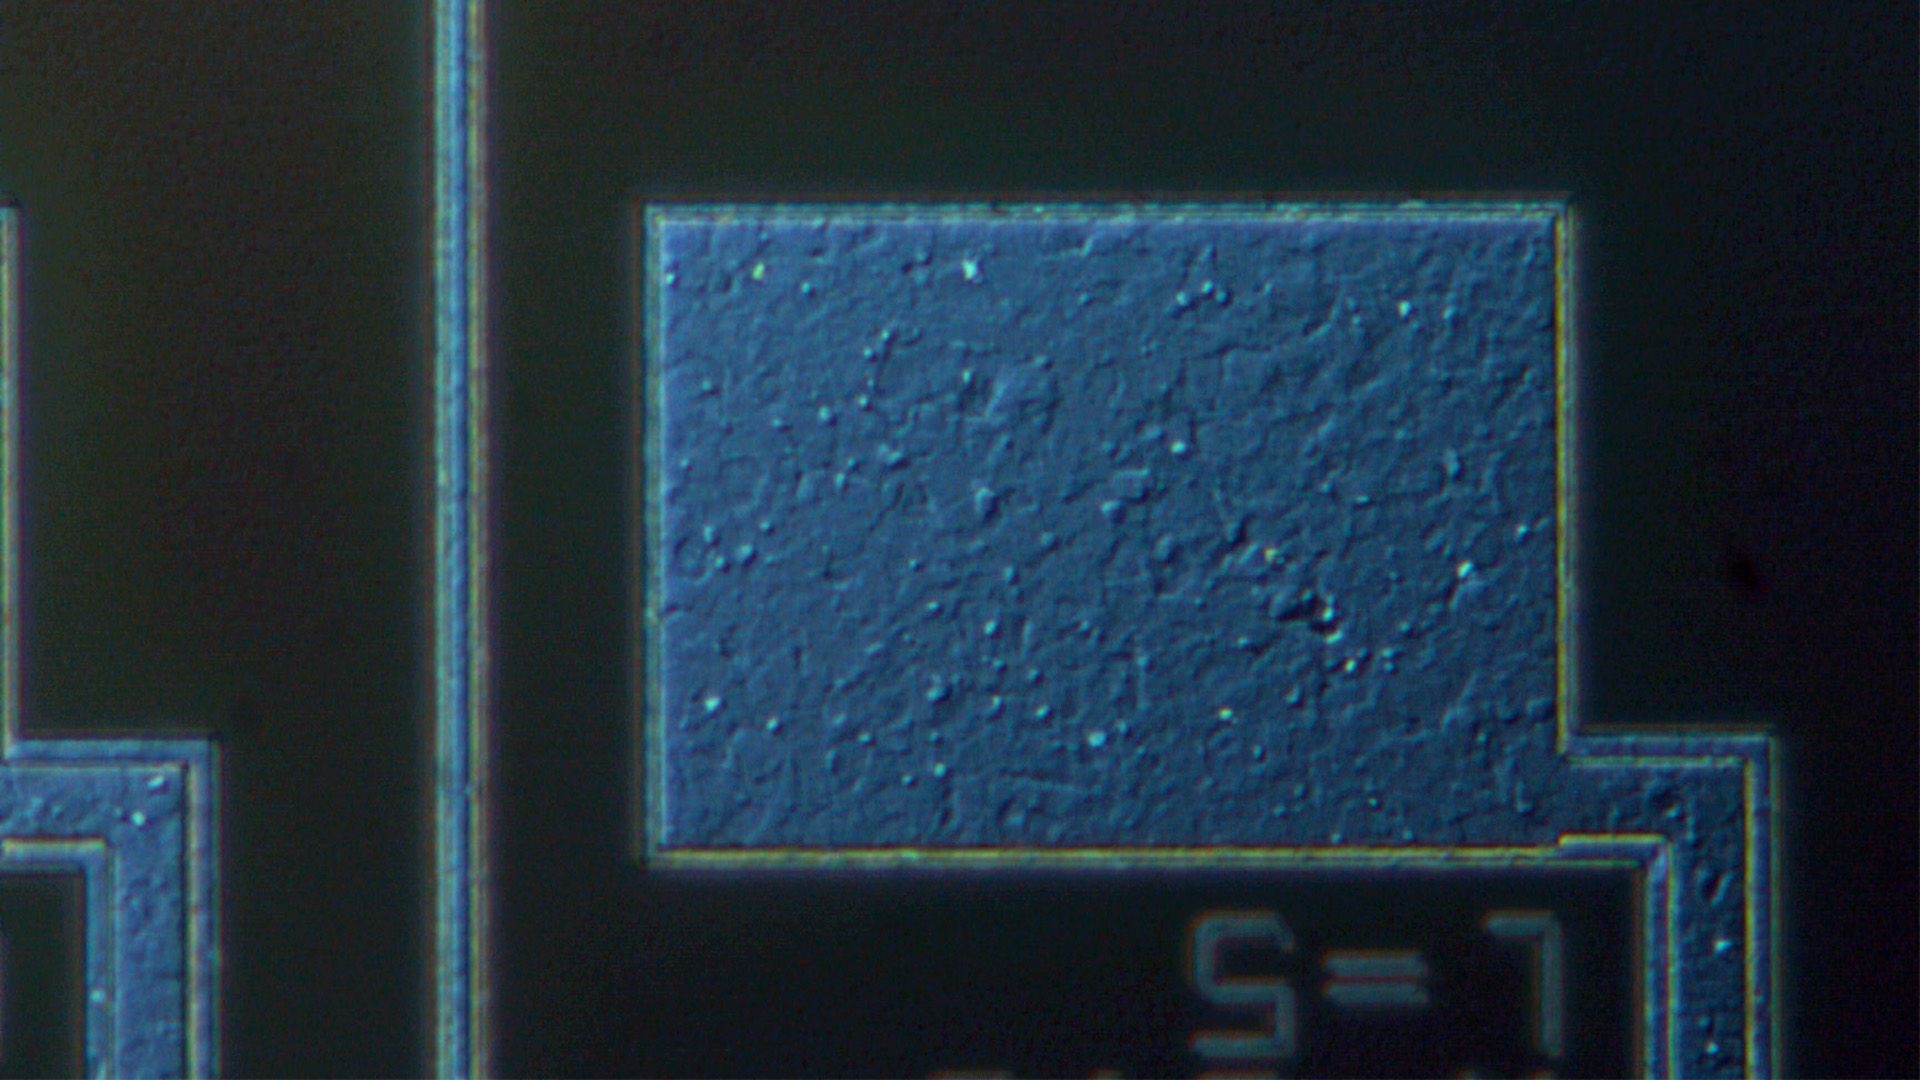 Inspection of an IC-patterned semiconductor. Image of the same region acquired with differential interference contrast (DIC) illumination.